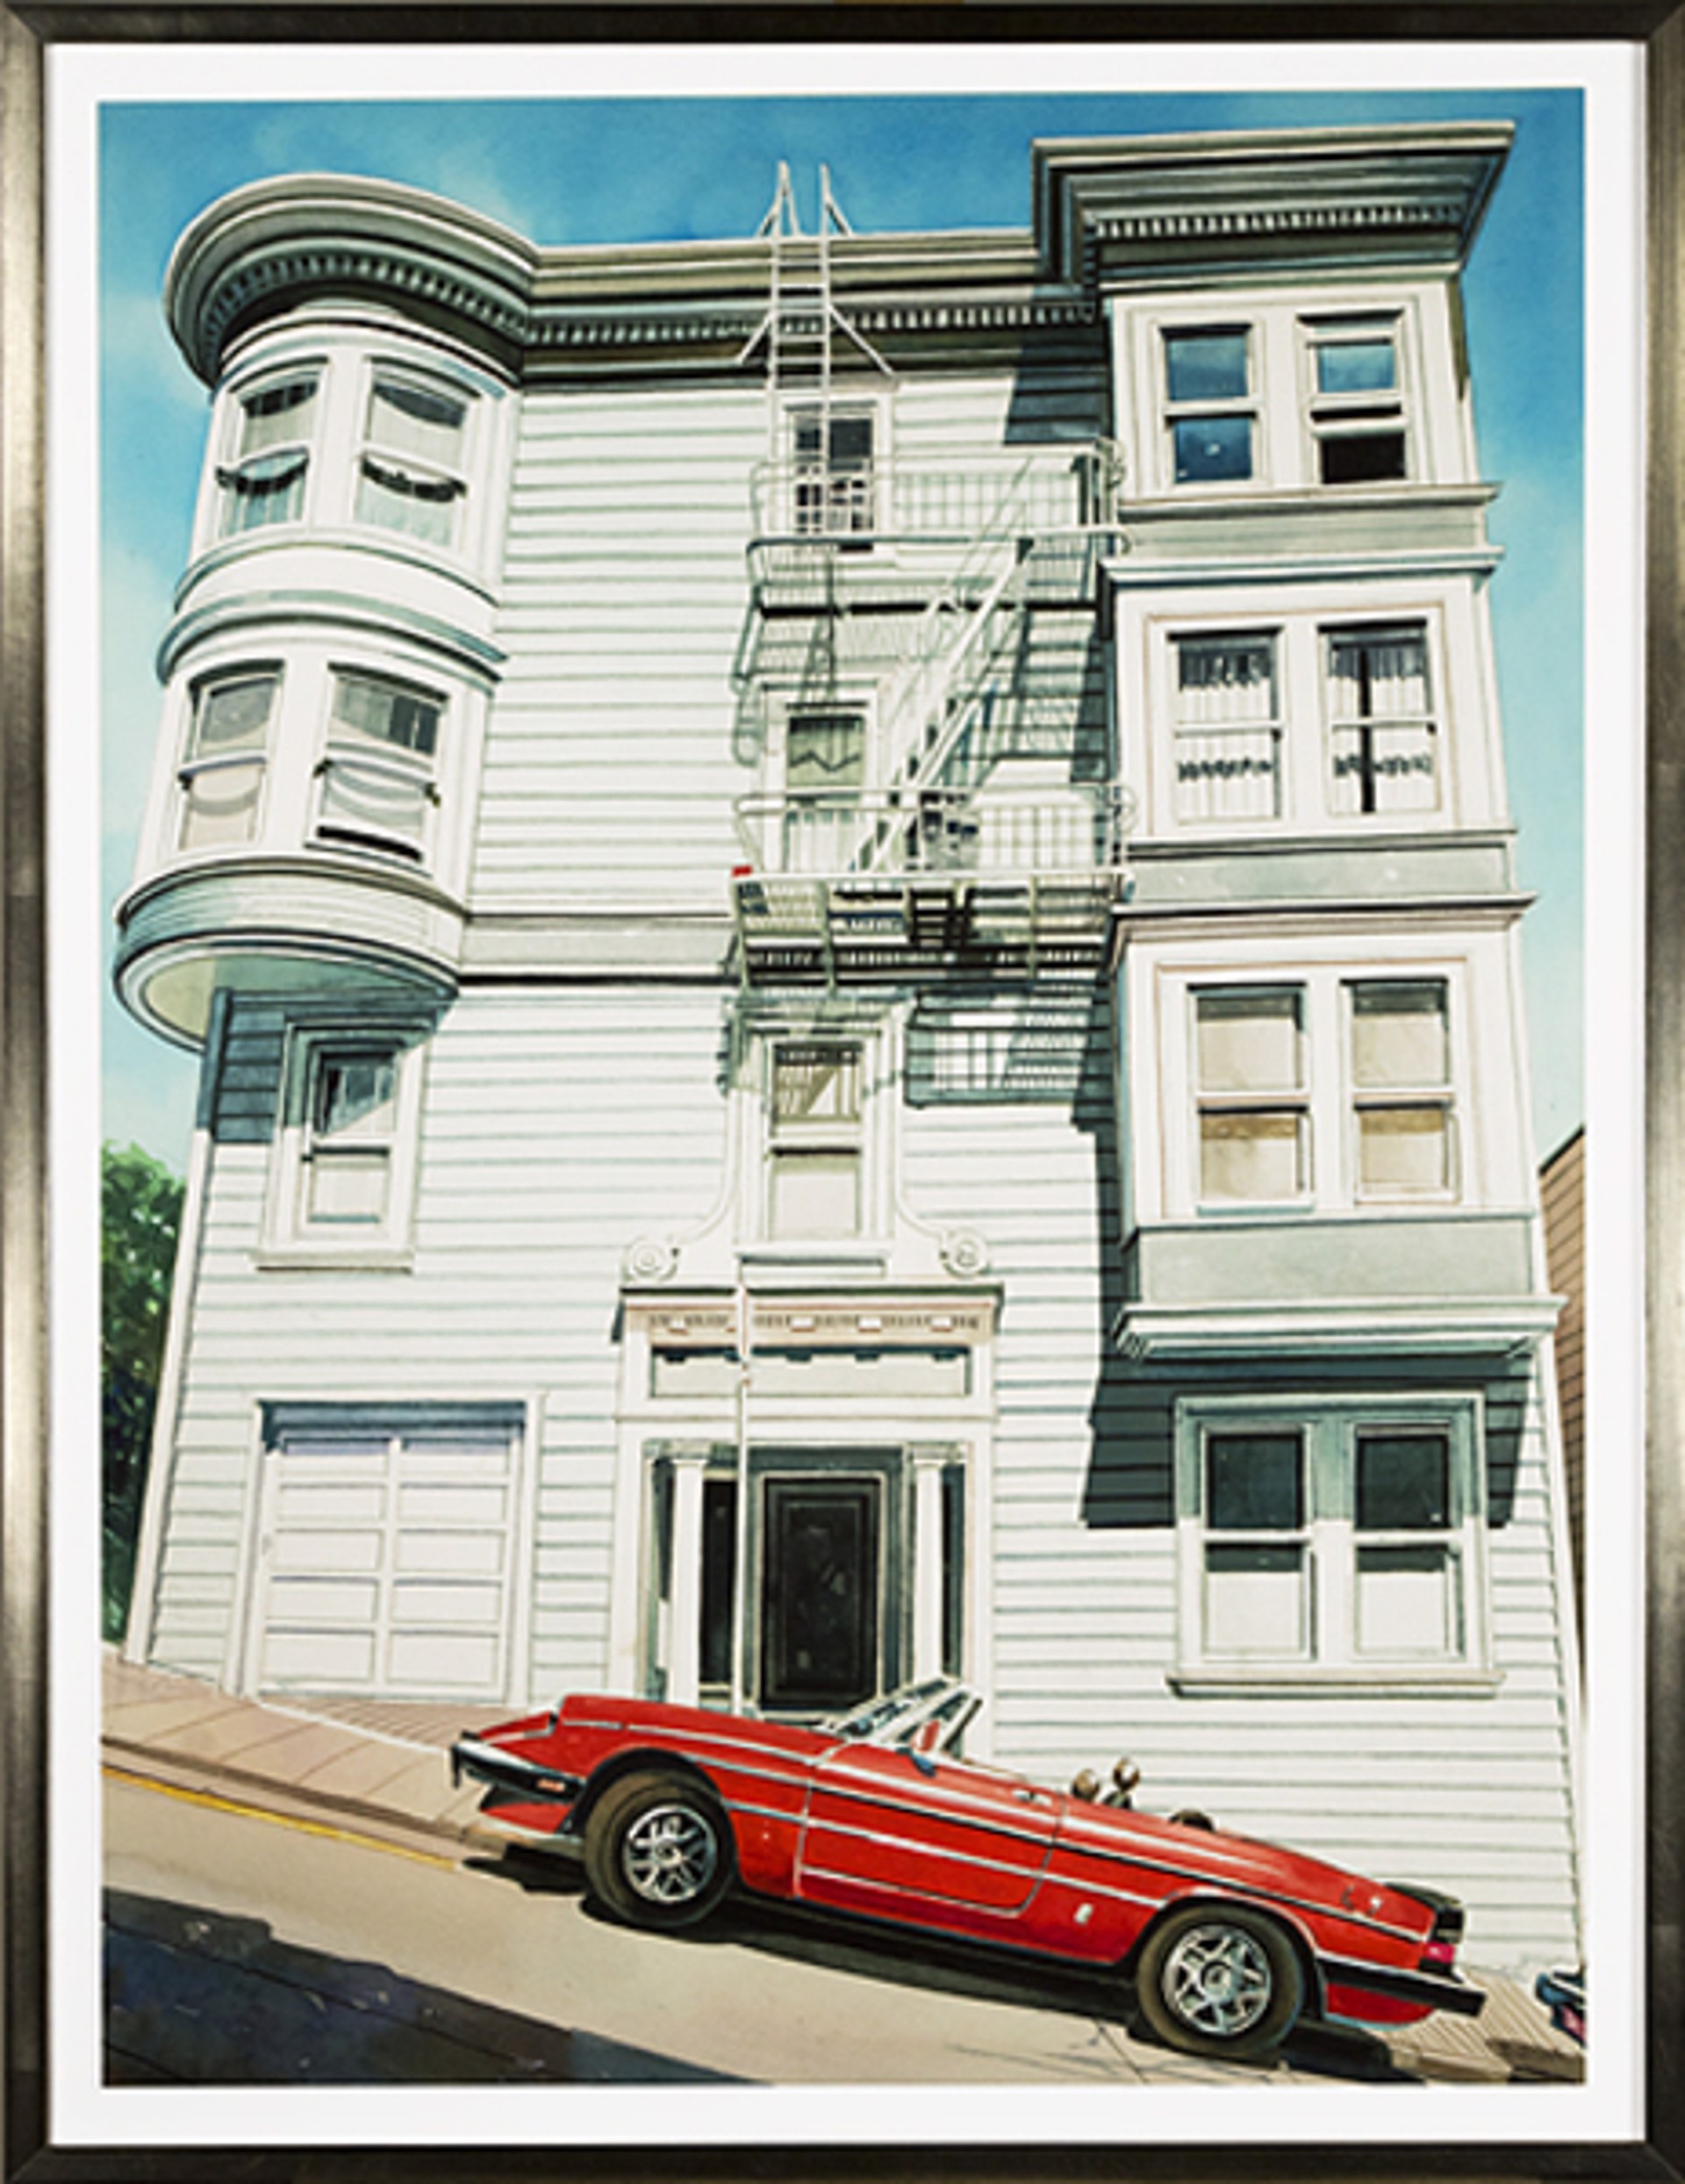 San Francisco by Bruce McCombs